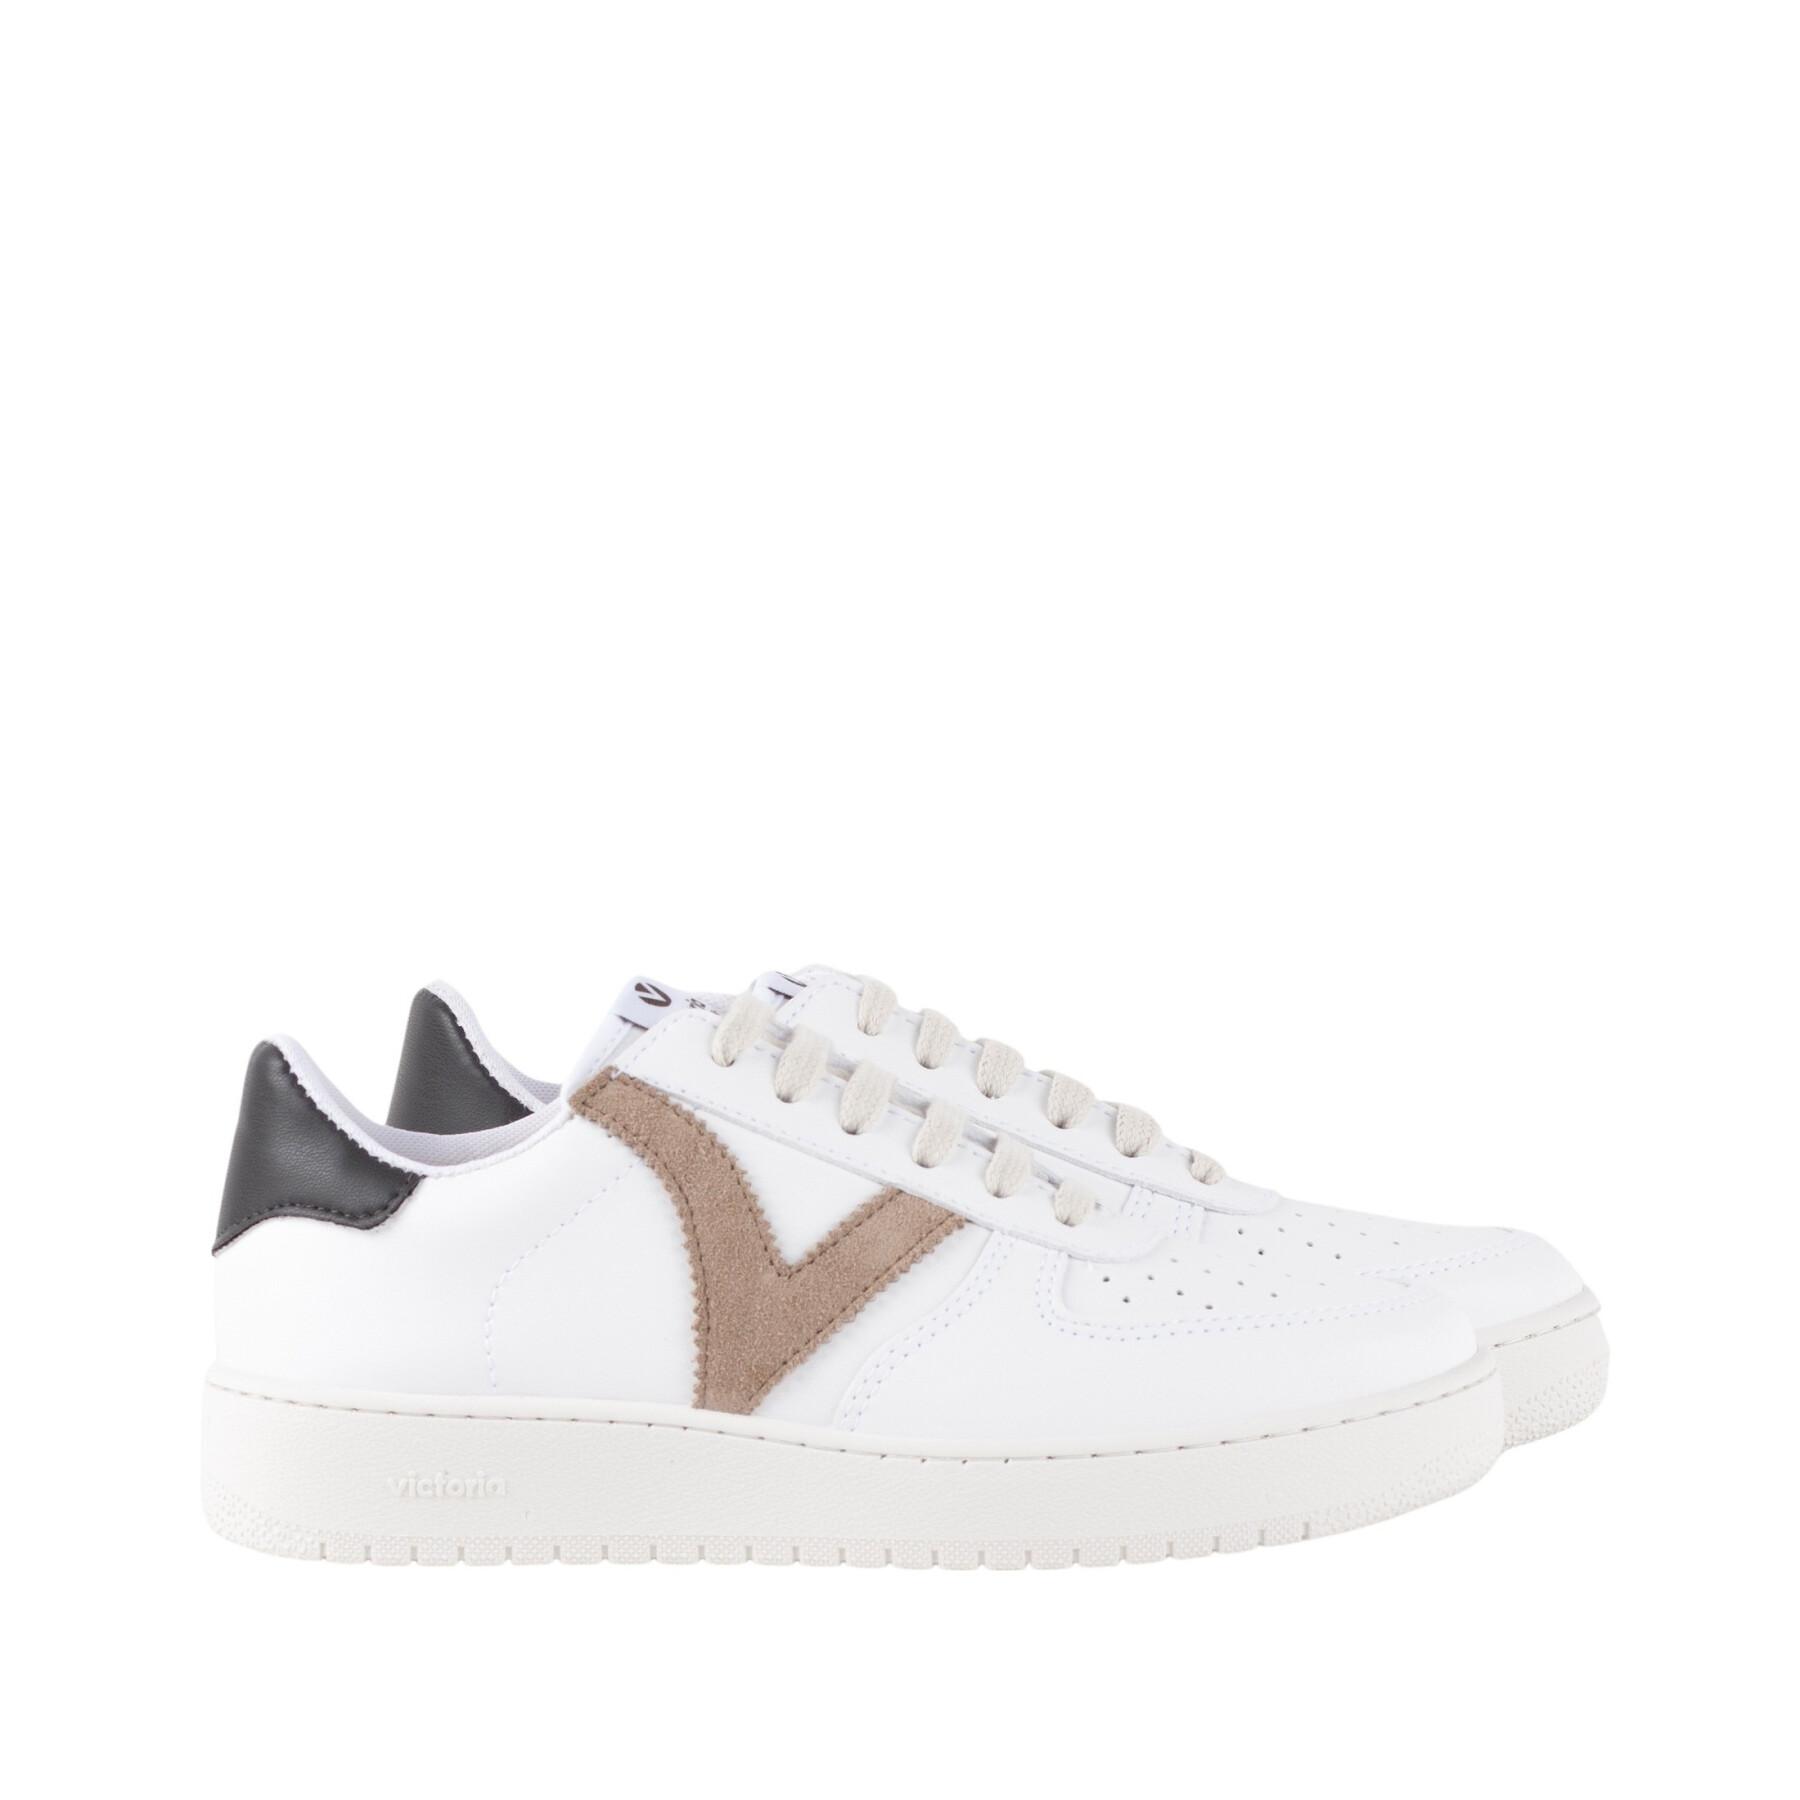 Women's leather-effect sneakers Victoria Madrid